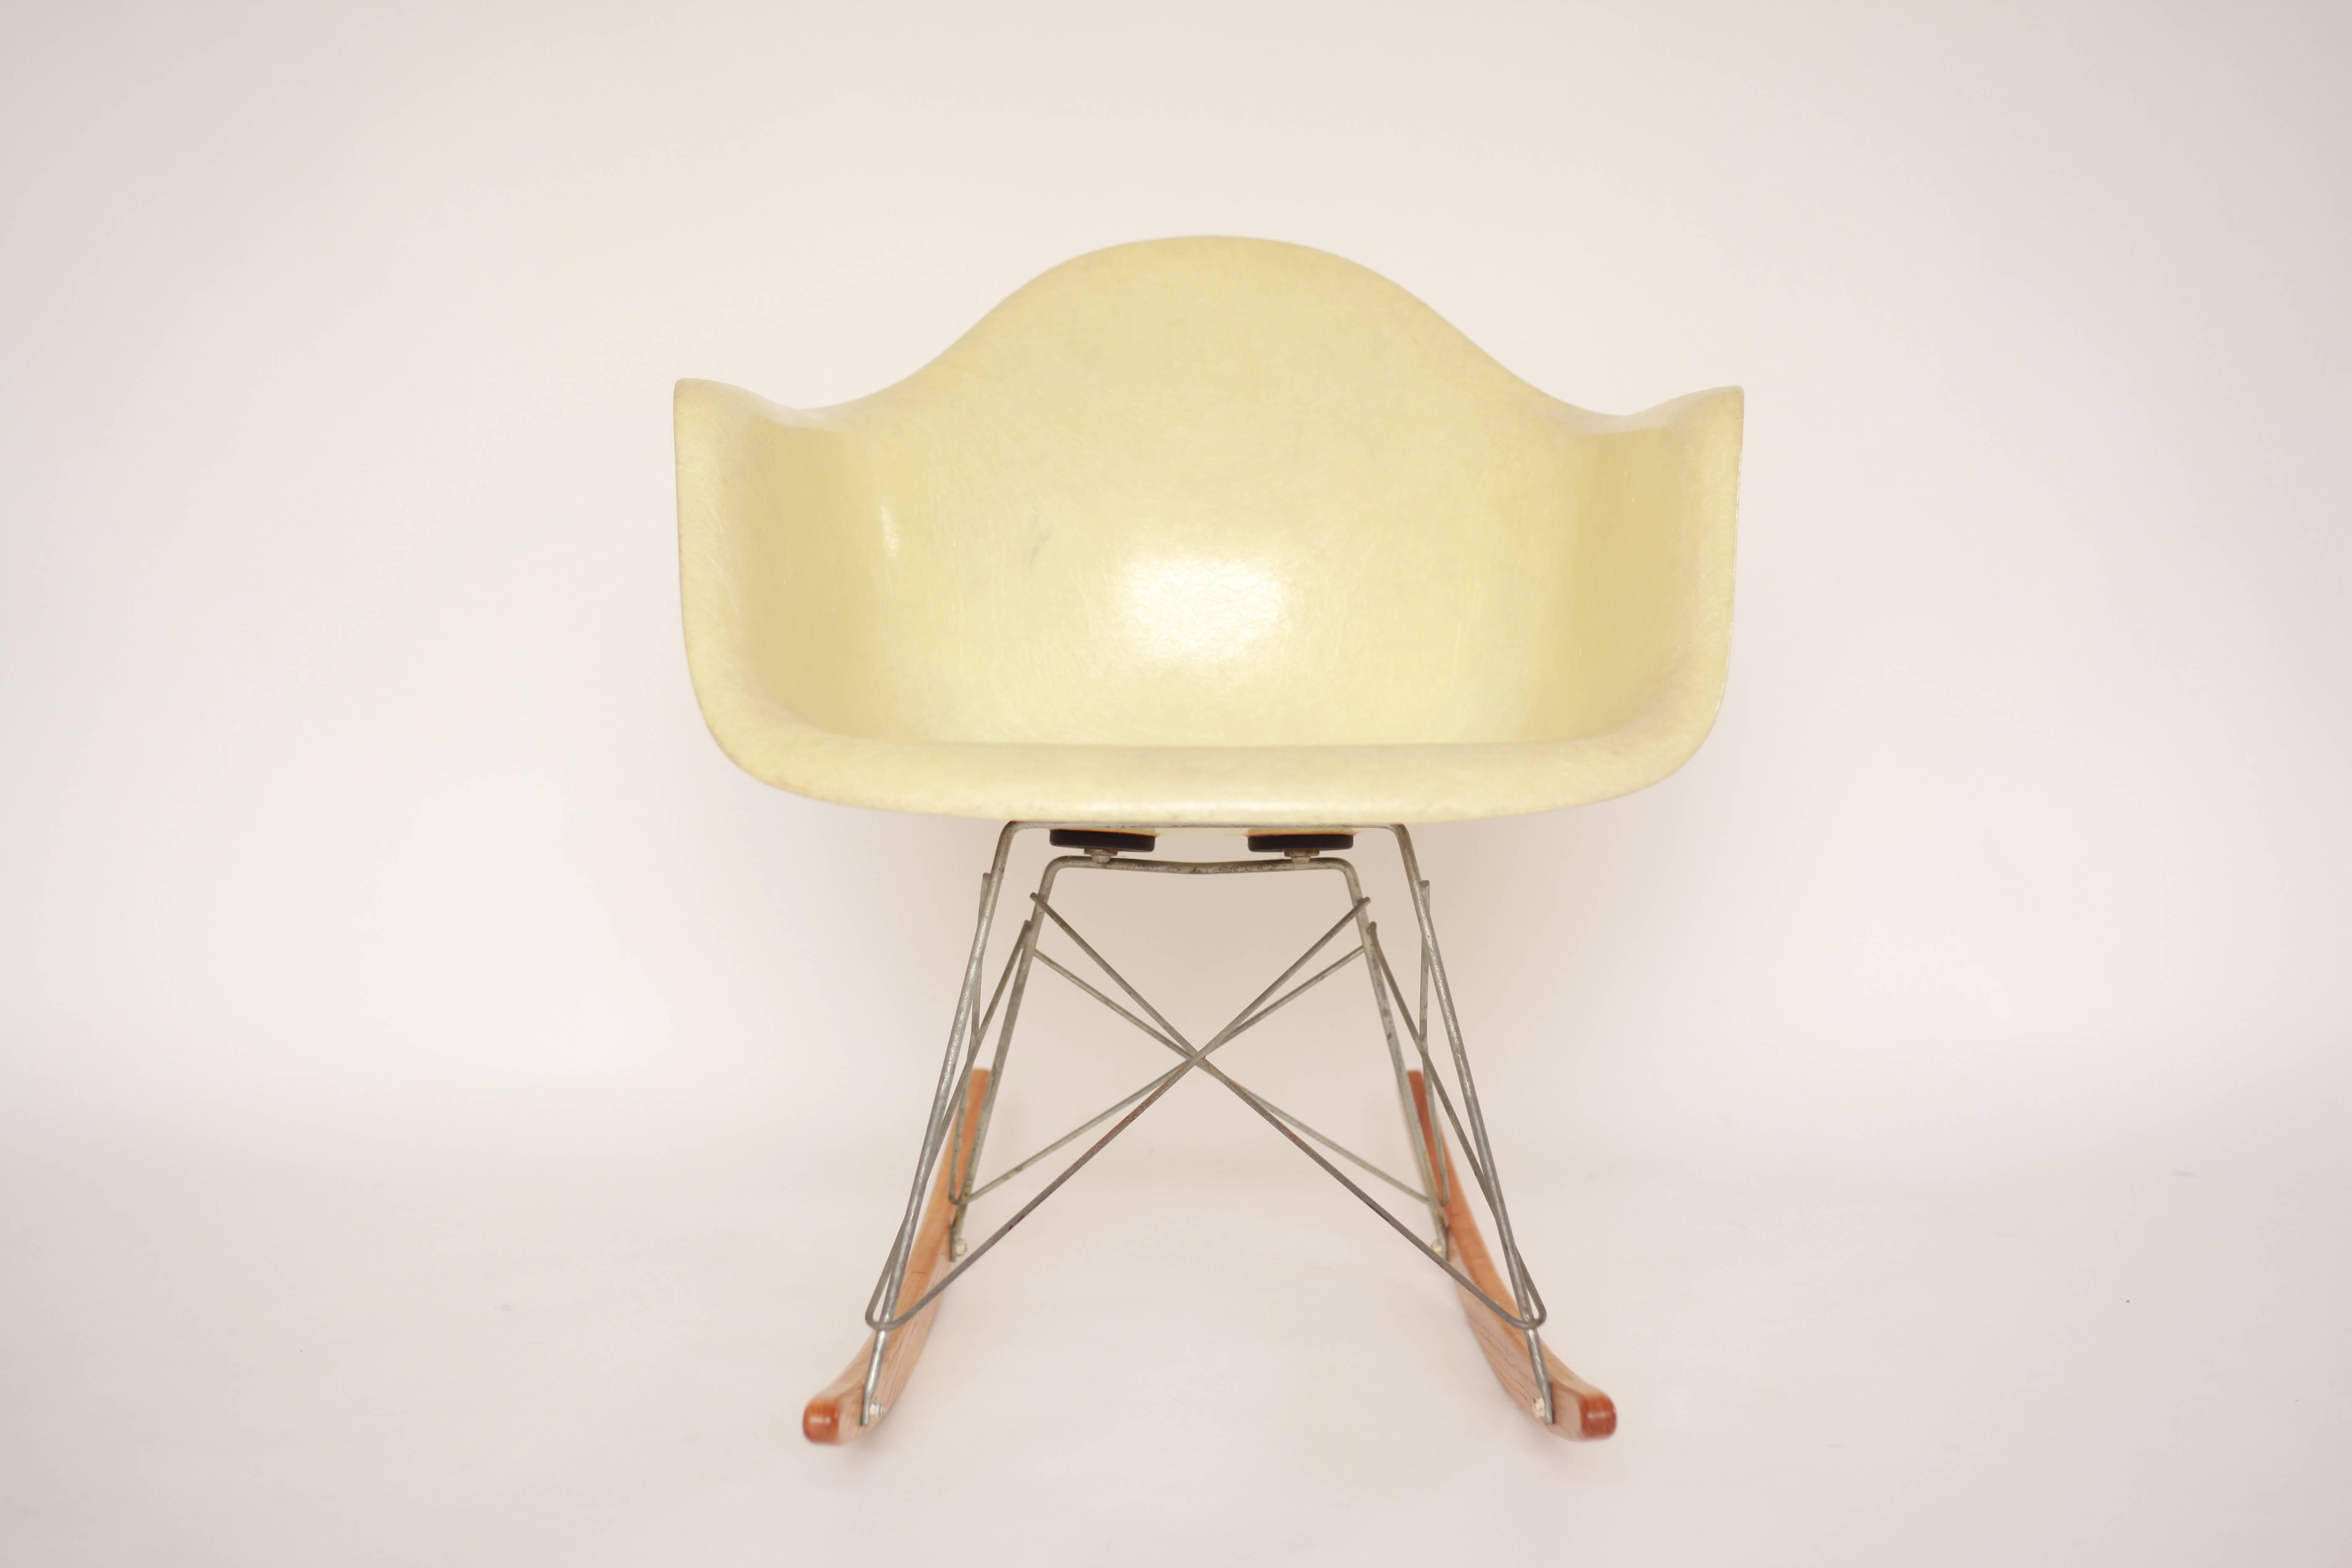 Very rare Eames (RAR) rope edge rocking chair with the first generation "ankle breaker" base. This example is "as found" from the family of the original purchaser. The fiberglass is in great condition. The runners appear to